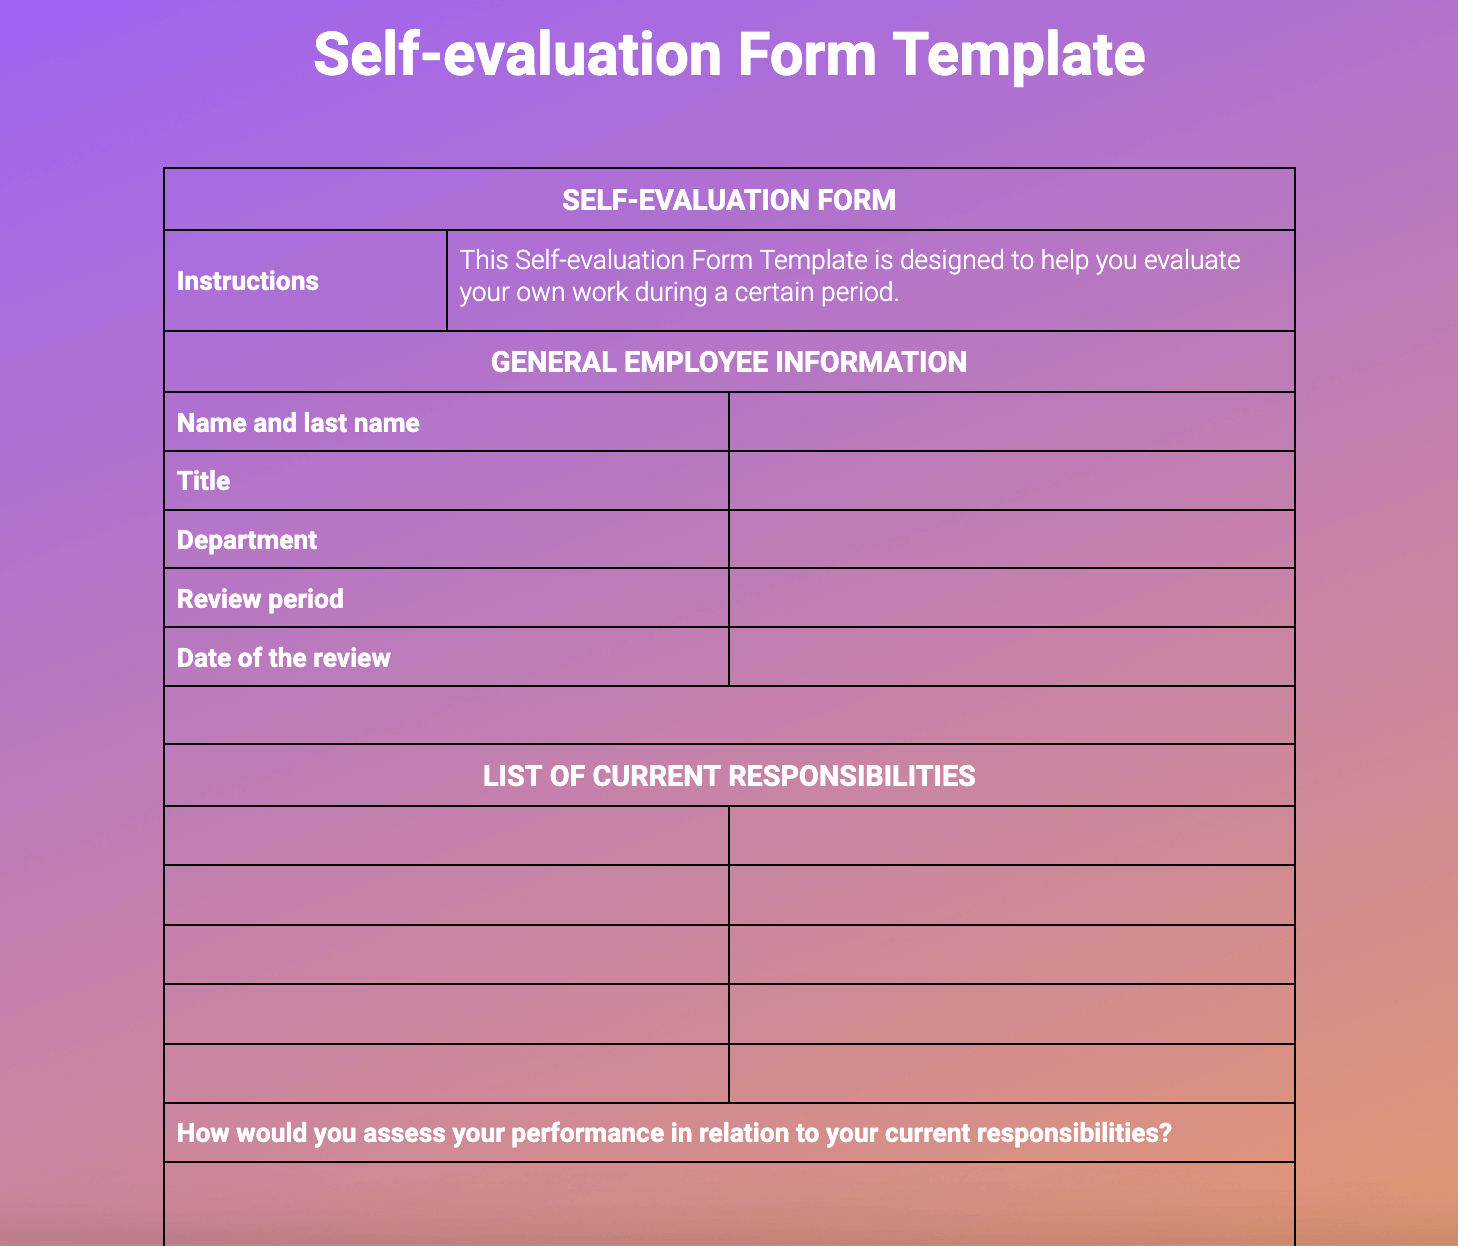 An example of our self-evaluation form template
